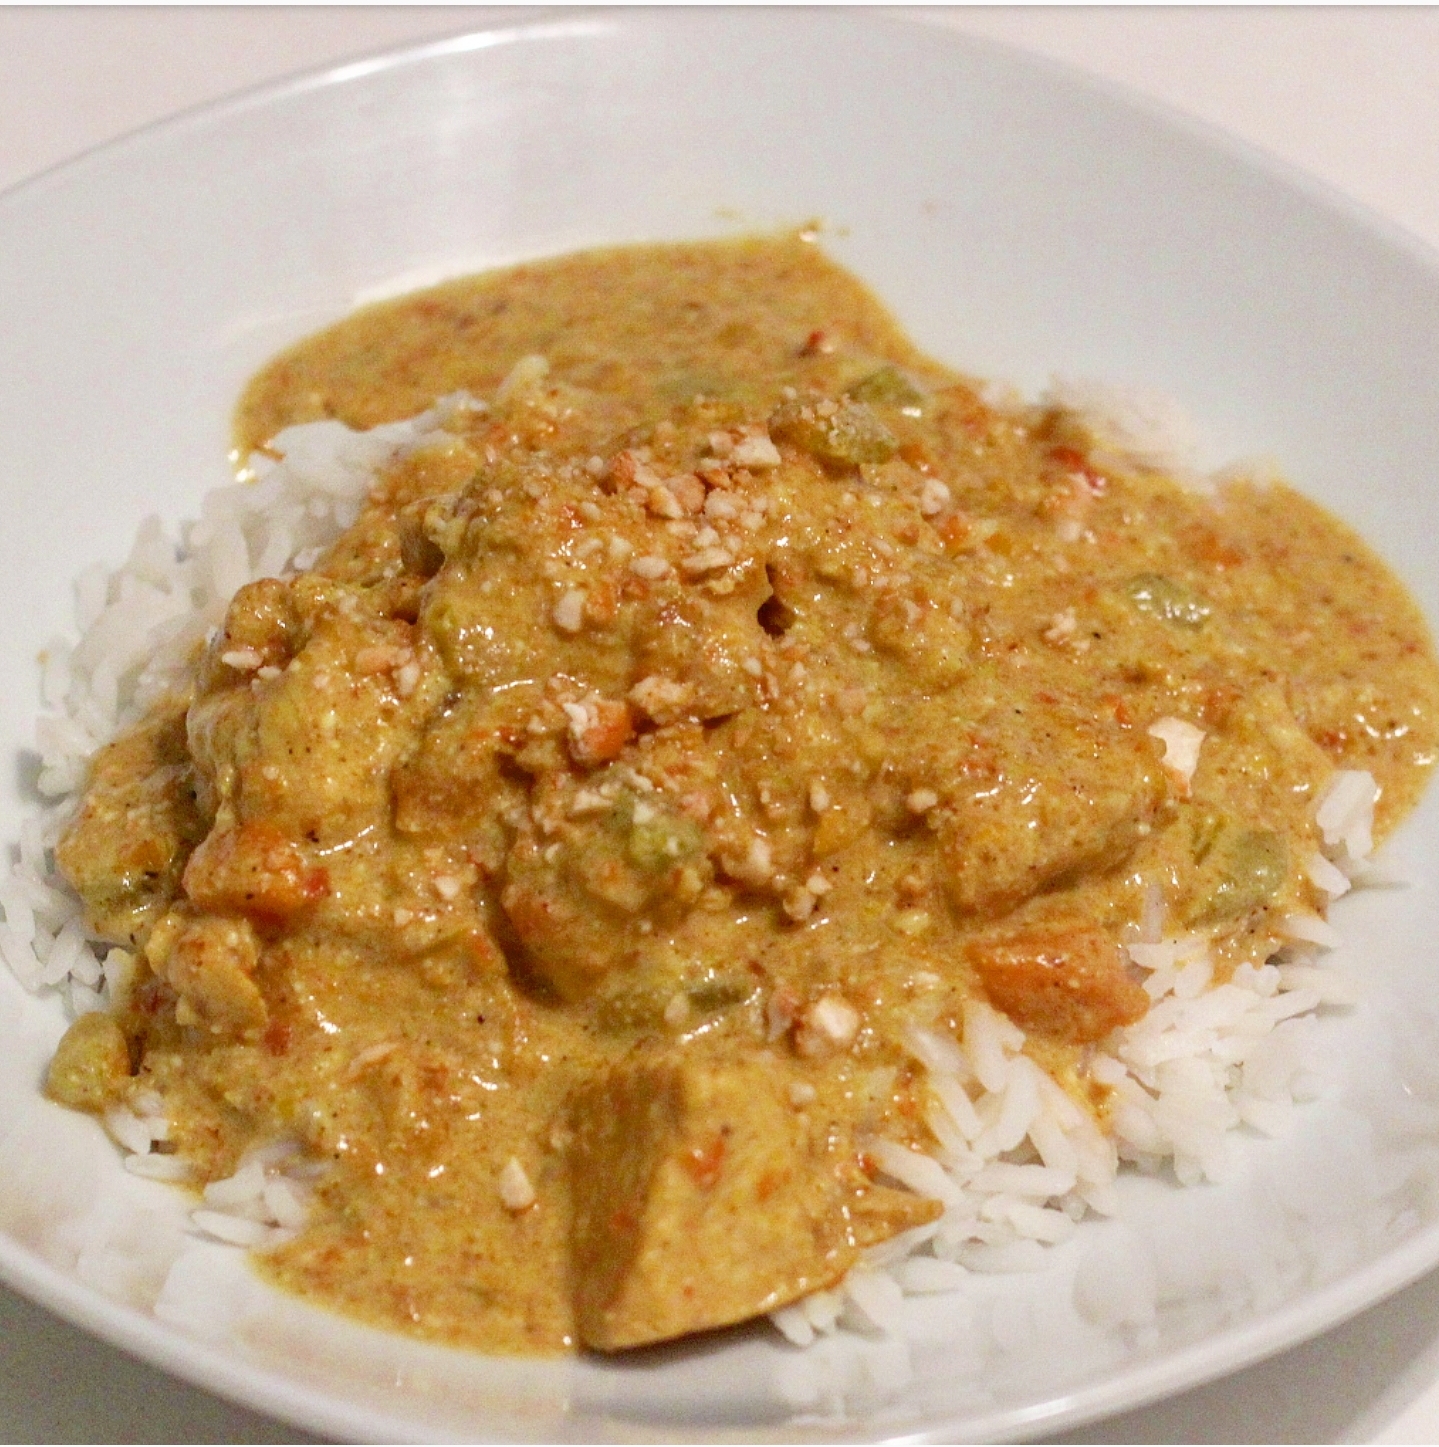 From My Kitchen: Curried Chicken with Cashews